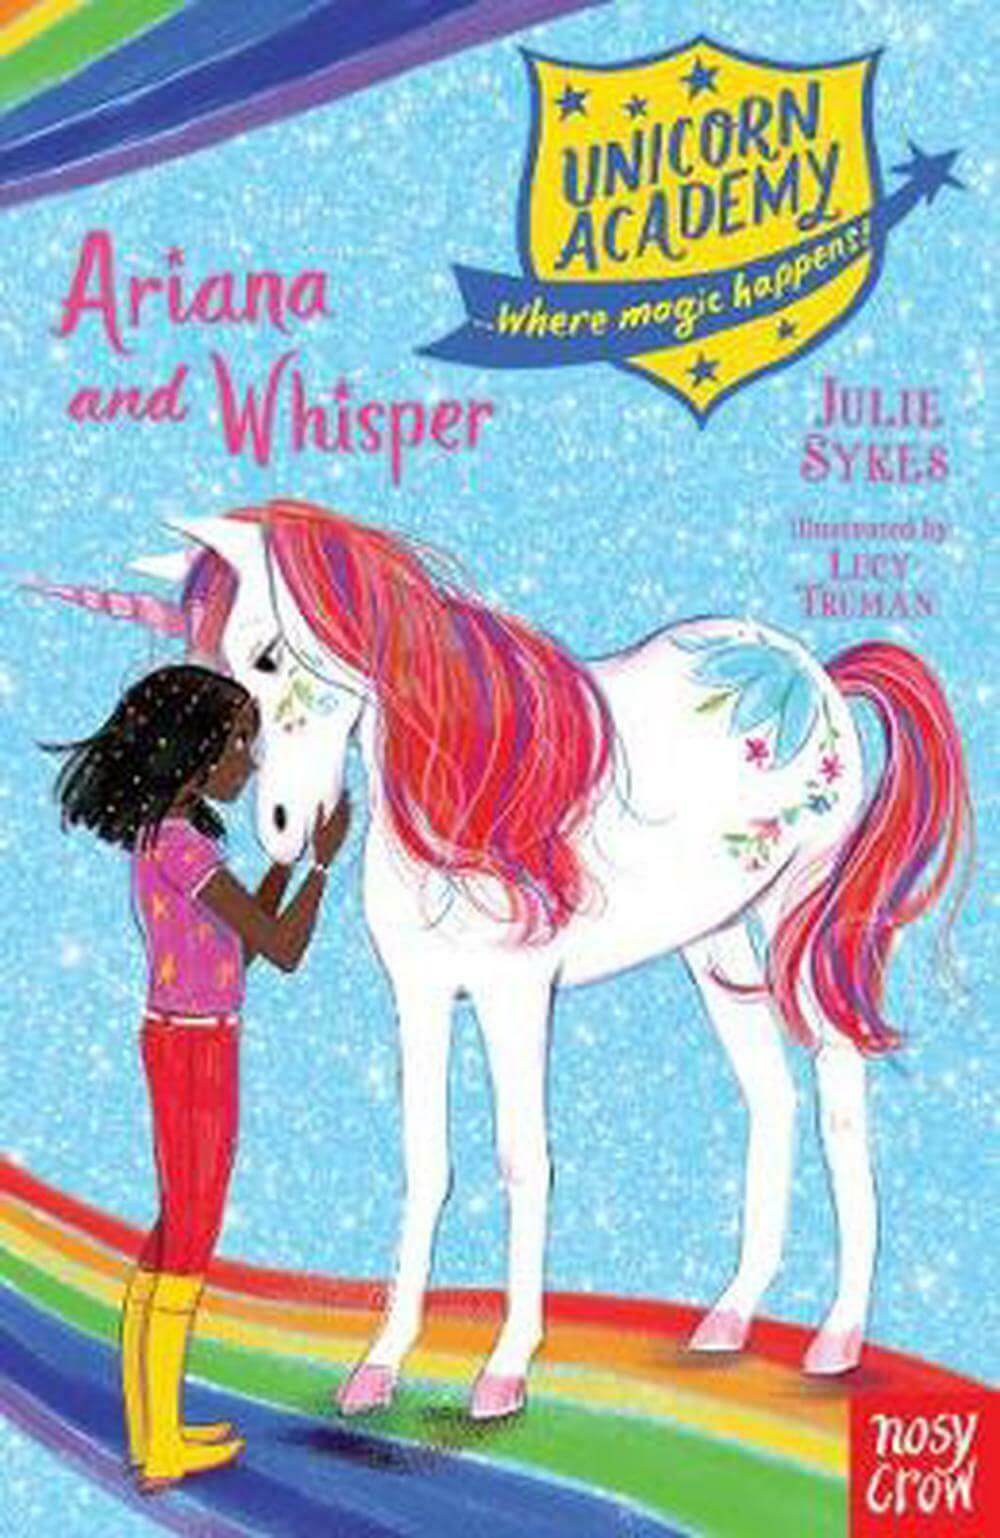 Unicorn Academy #8: Ariana and Whisper by Julie Sykes, Illustrated by Lucy Truman - Ages 6 to 9